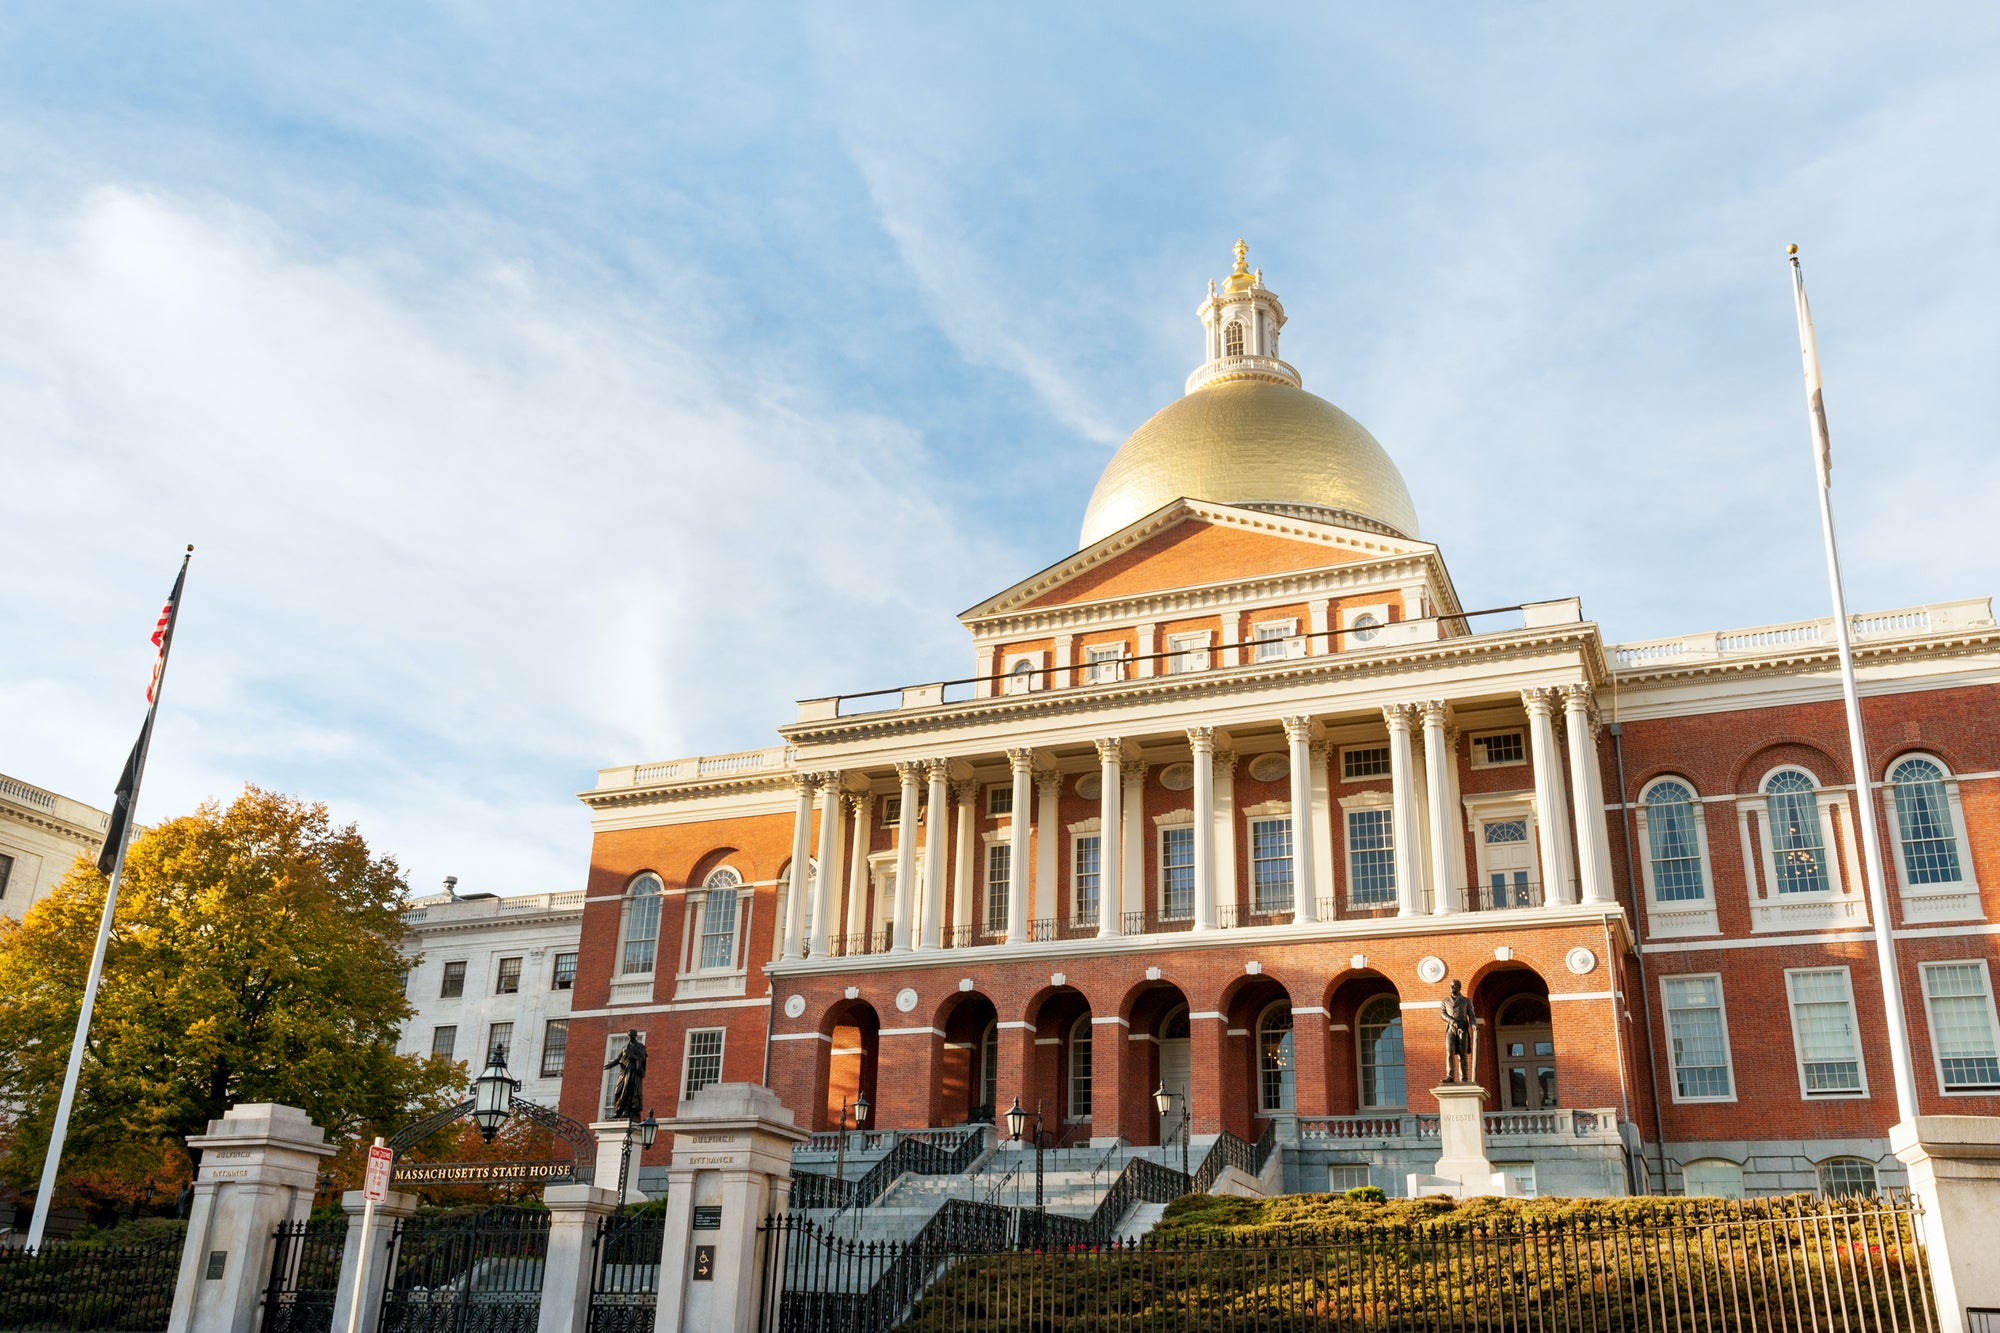 Students visited the Massachusetts State House as part of an activity by FFPAC